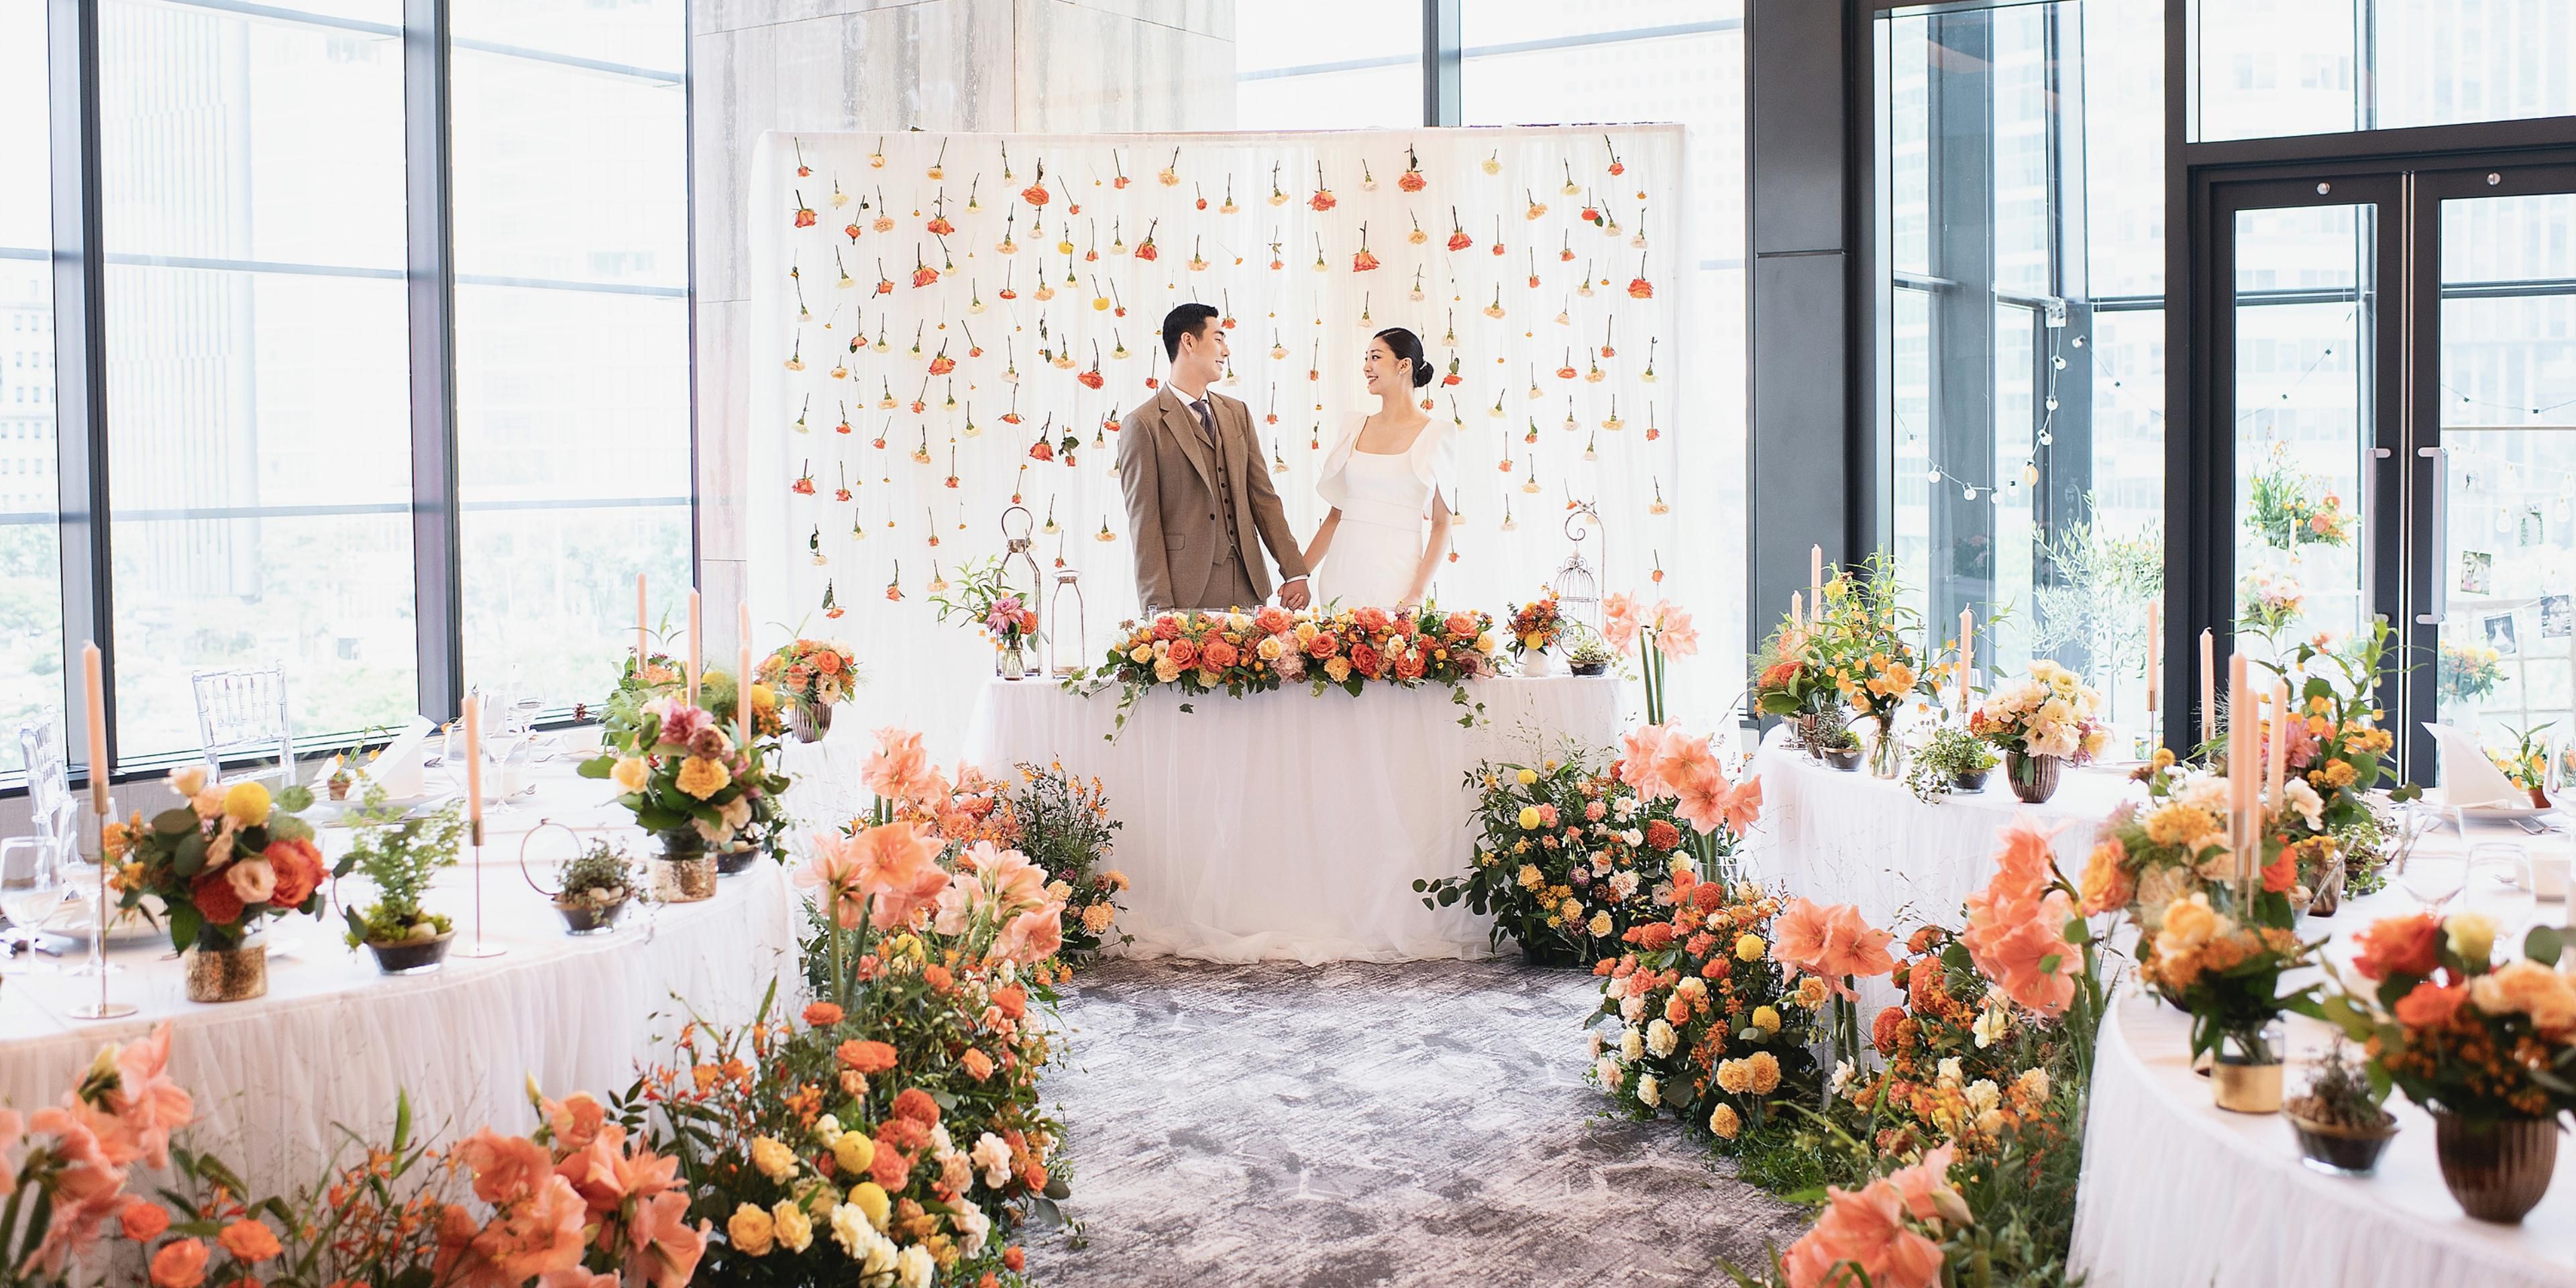 Make your wedding day the best day of your life with the exquisite quality and service of Grand InterContinental Seoul Parnas.